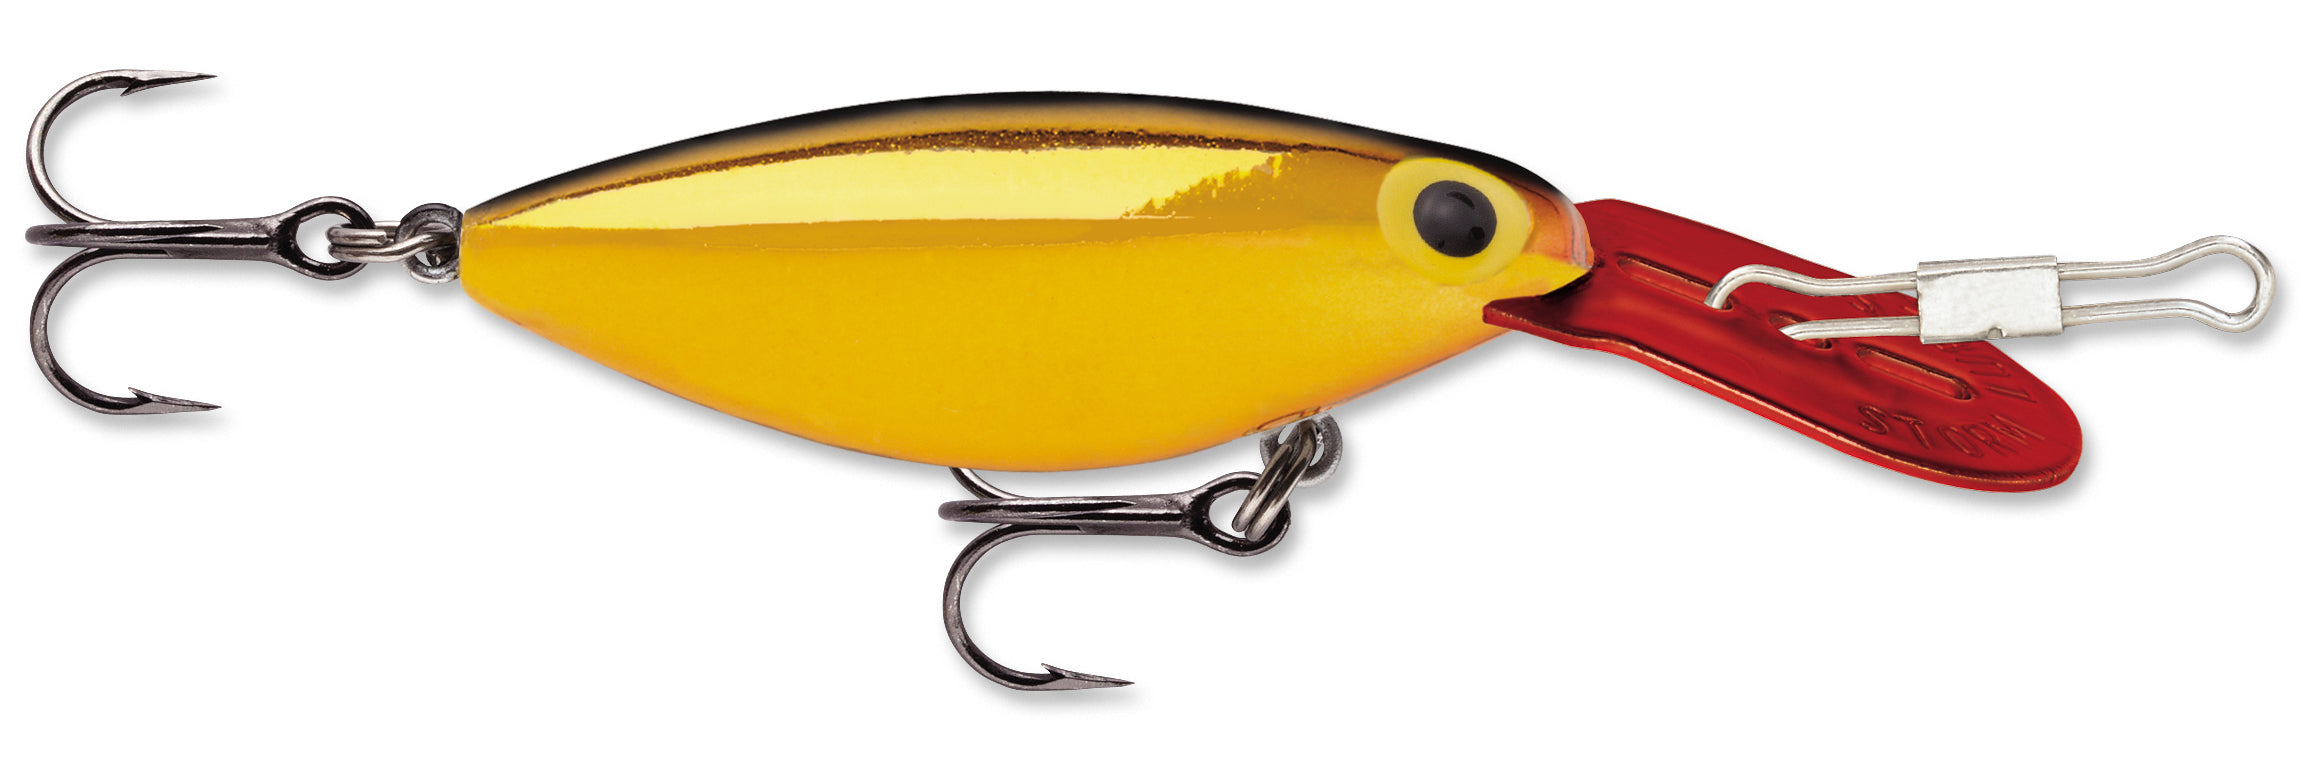 BEST 10 Pack Gold Aberdeen Snells – Stopper Lures